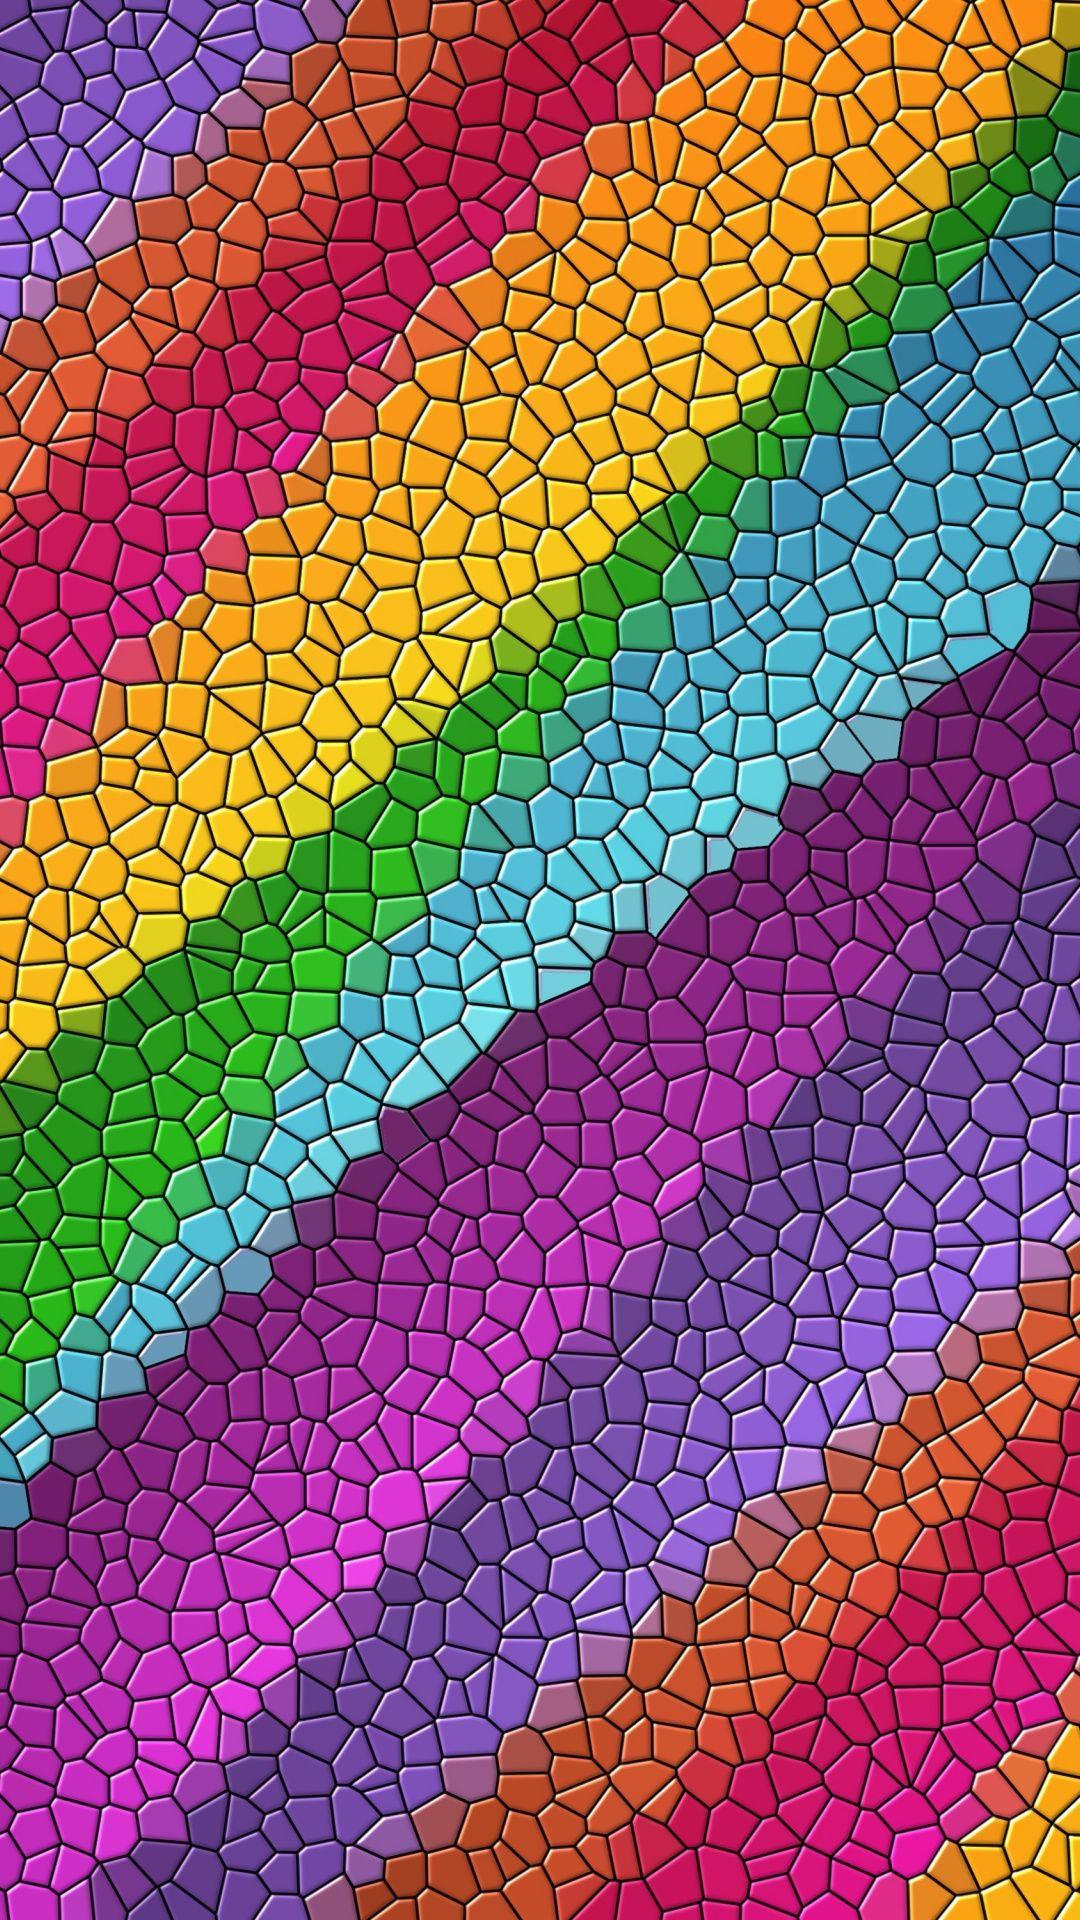 Mosaic, tile, pattern, multicolored, abstract, 1080x1920 wallpaper. Colorful wallpaper, Cellphone wallpaper, Rainbow wallpaper